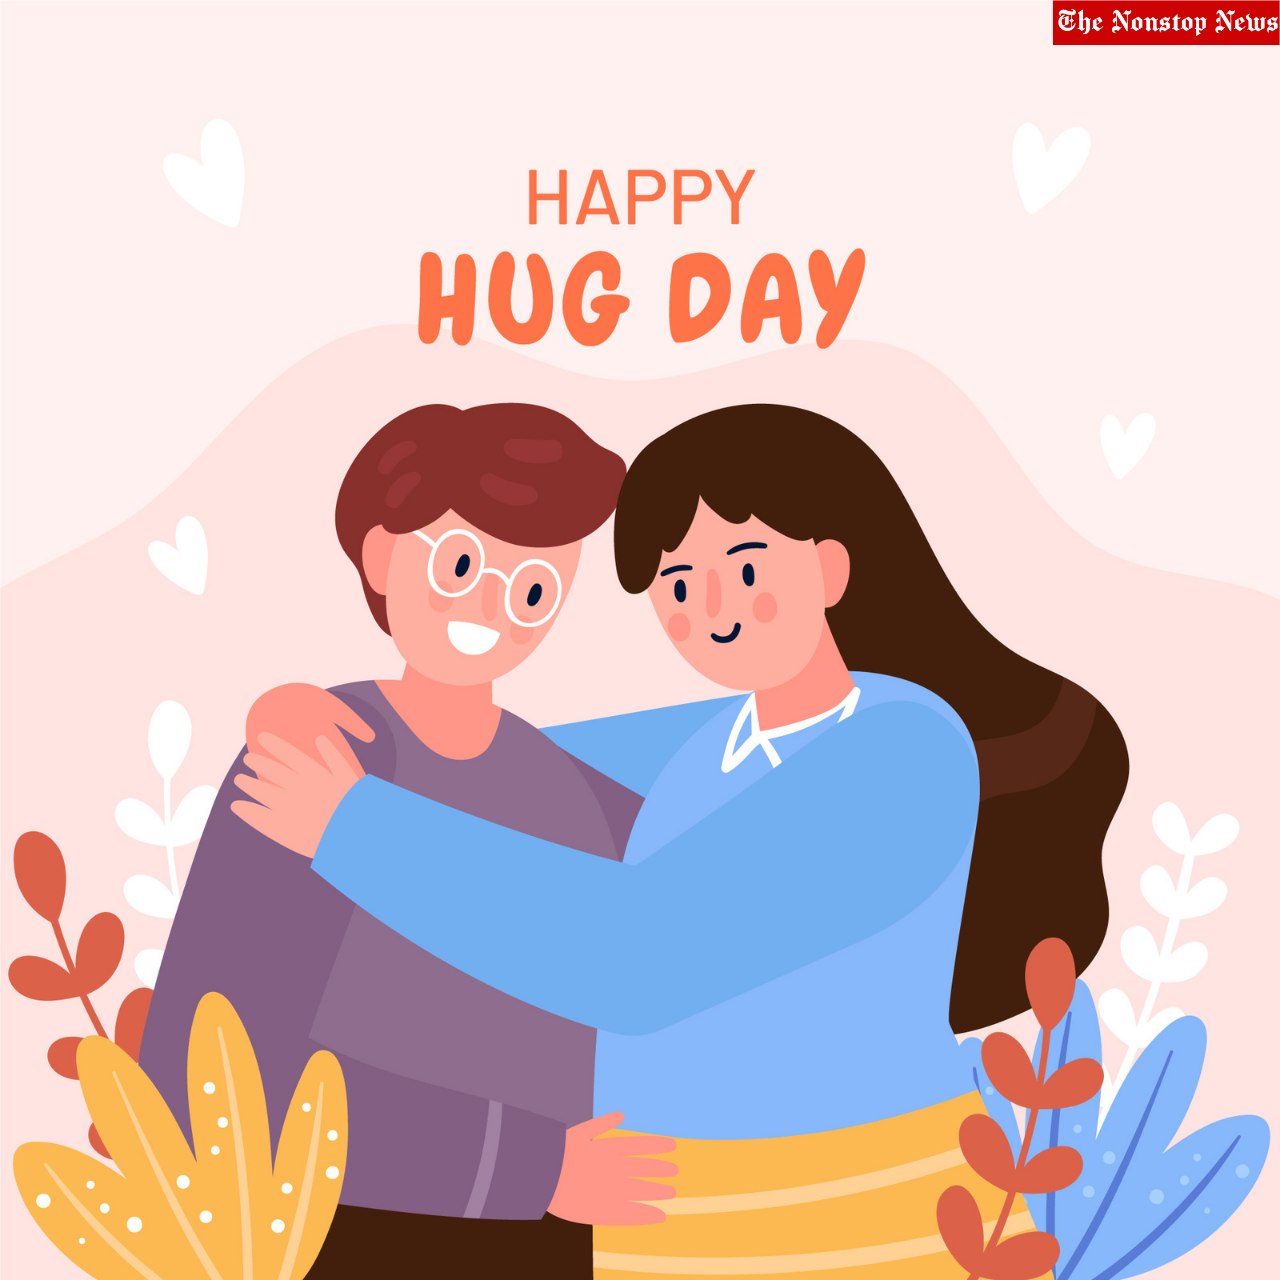 Hug Day 2022: Wishes, Quotes, HD Images, Messages, Status, Shayari to greet your love on the 5th day of Valentine's week